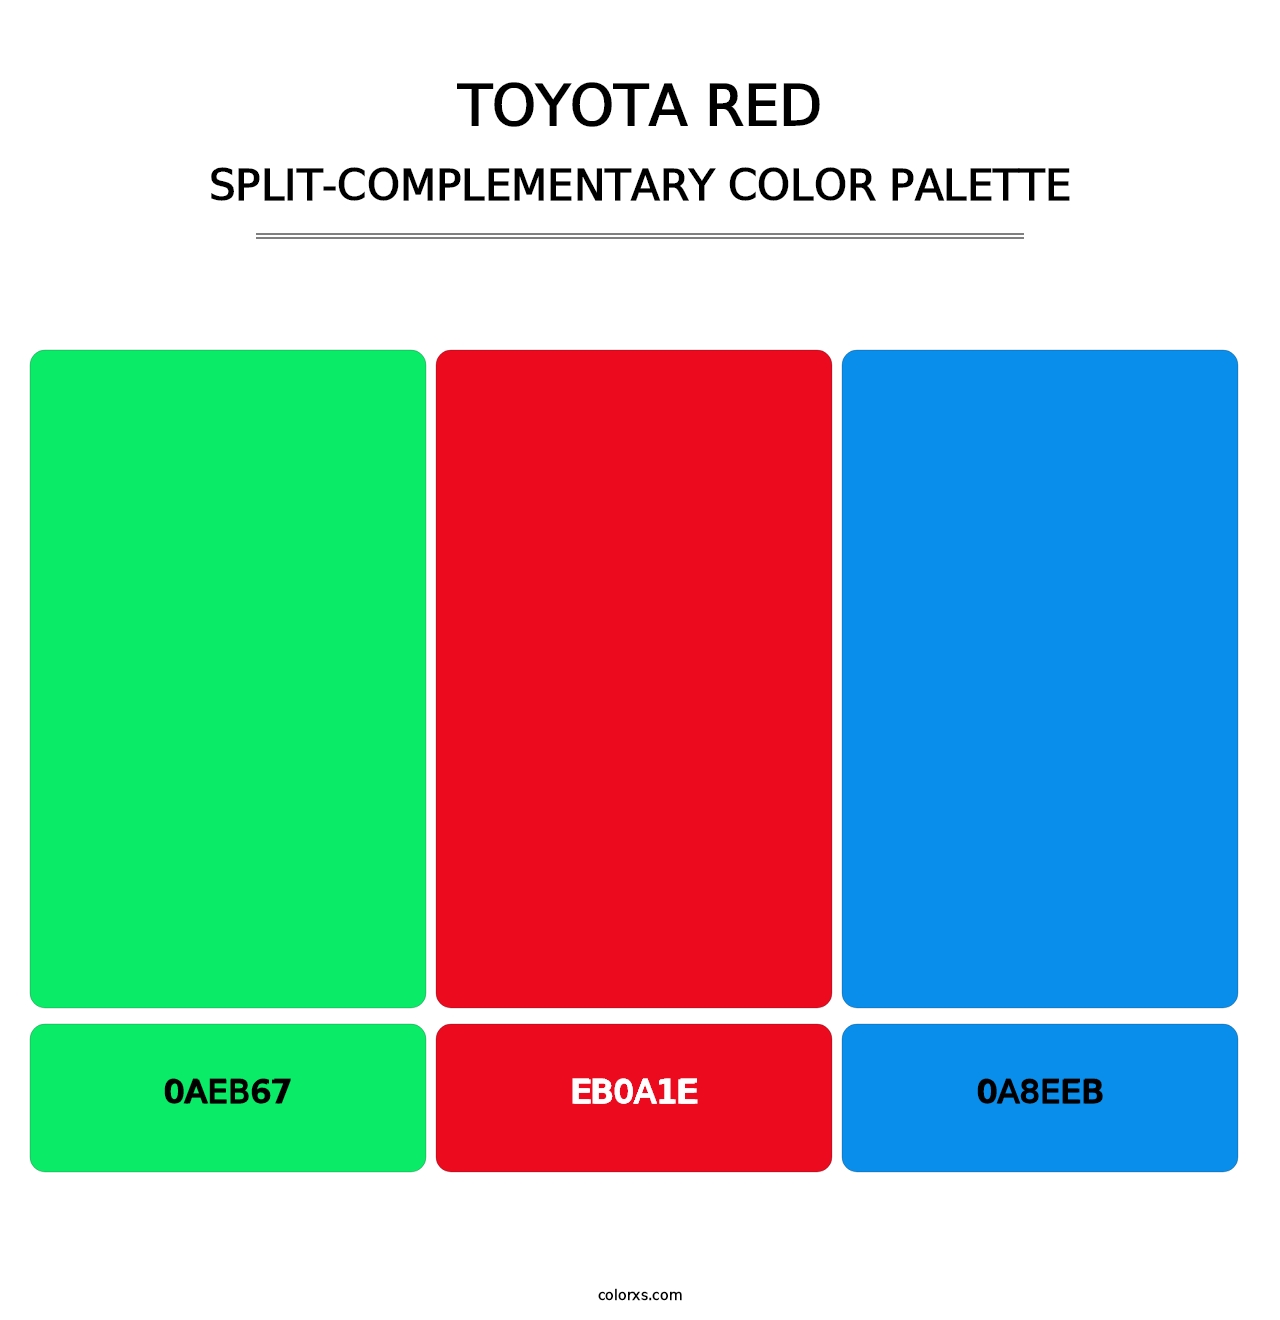 Toyota Red - Split-Complementary Color Palette